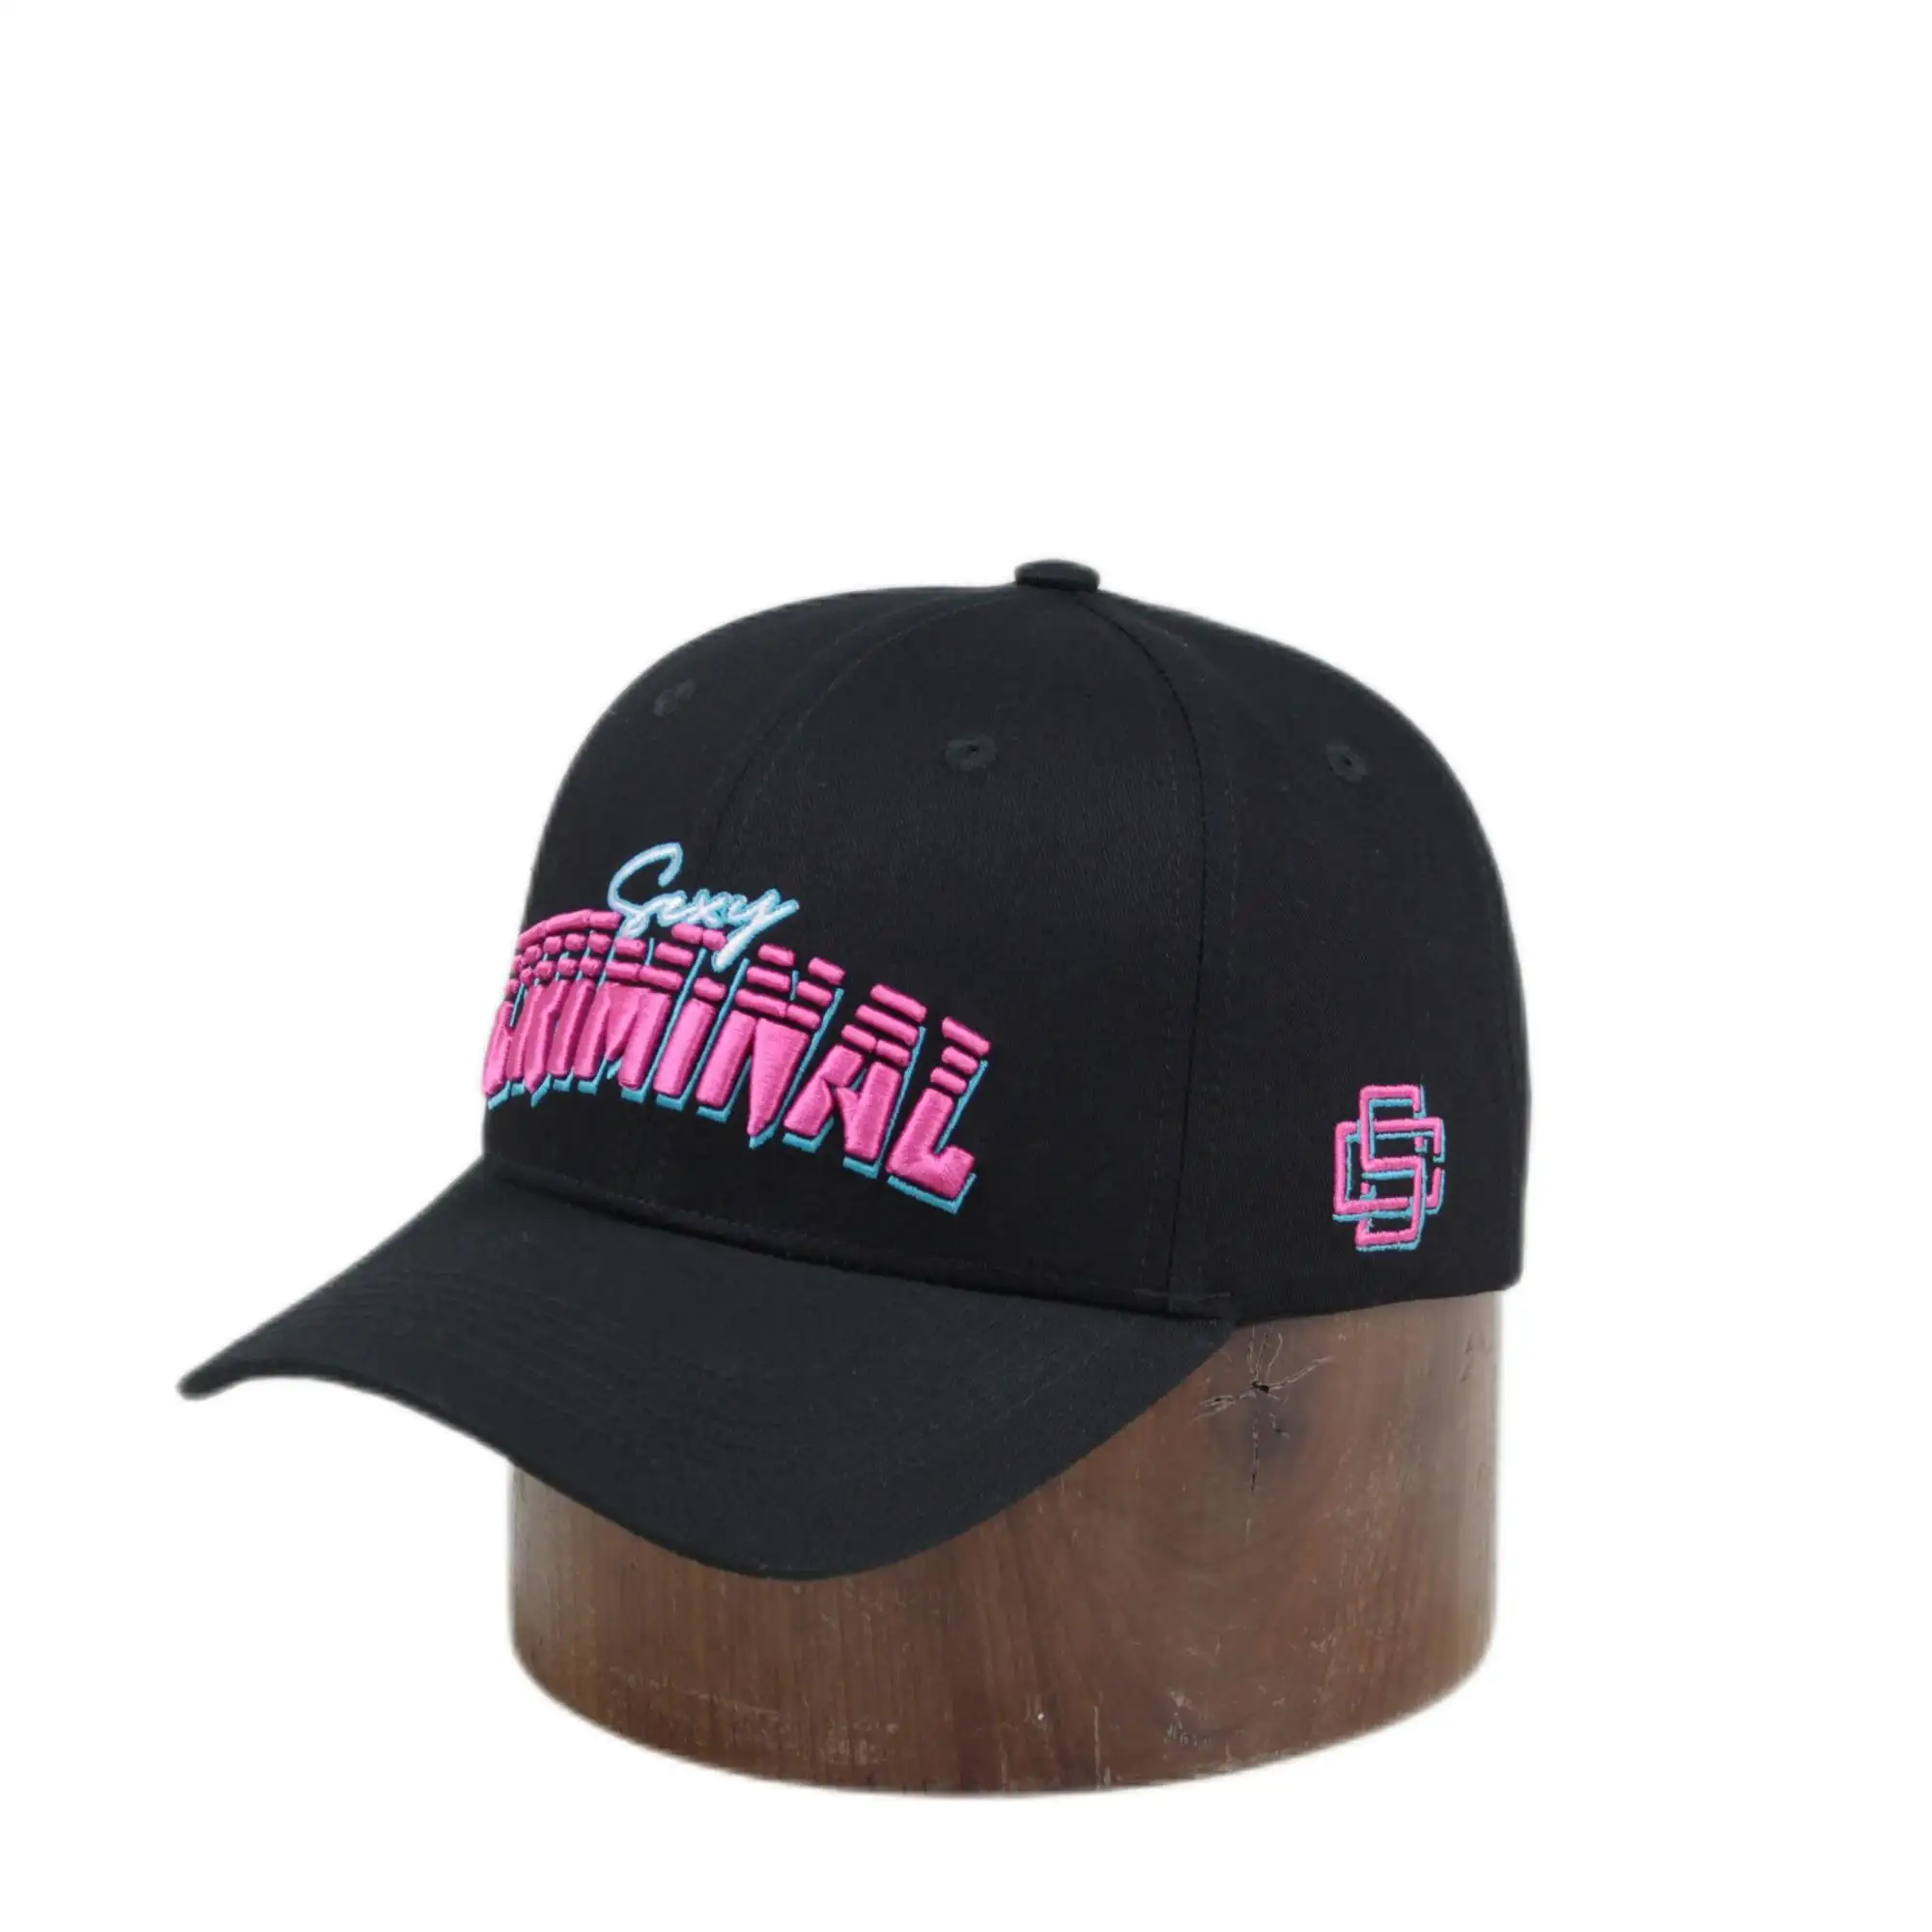 Wholesale Custom Embroidery Goods From Sports Caps corporate promotional gift items promo baseball hat and cap